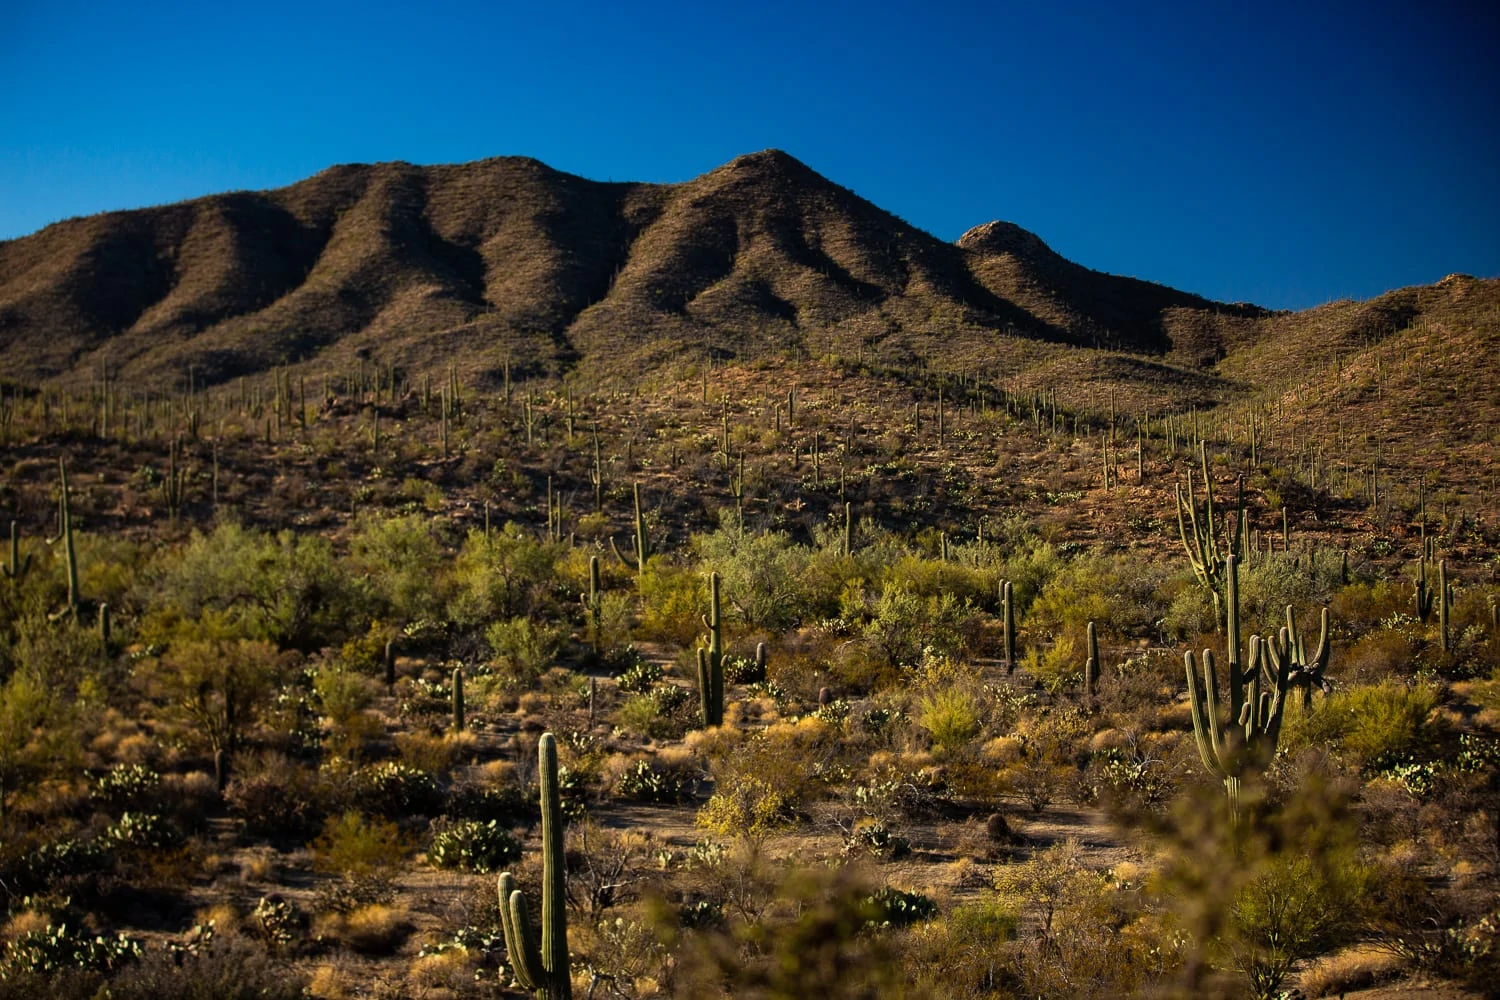 The mountains in Saguaro National Park's west district as seen across a valley of cacti.